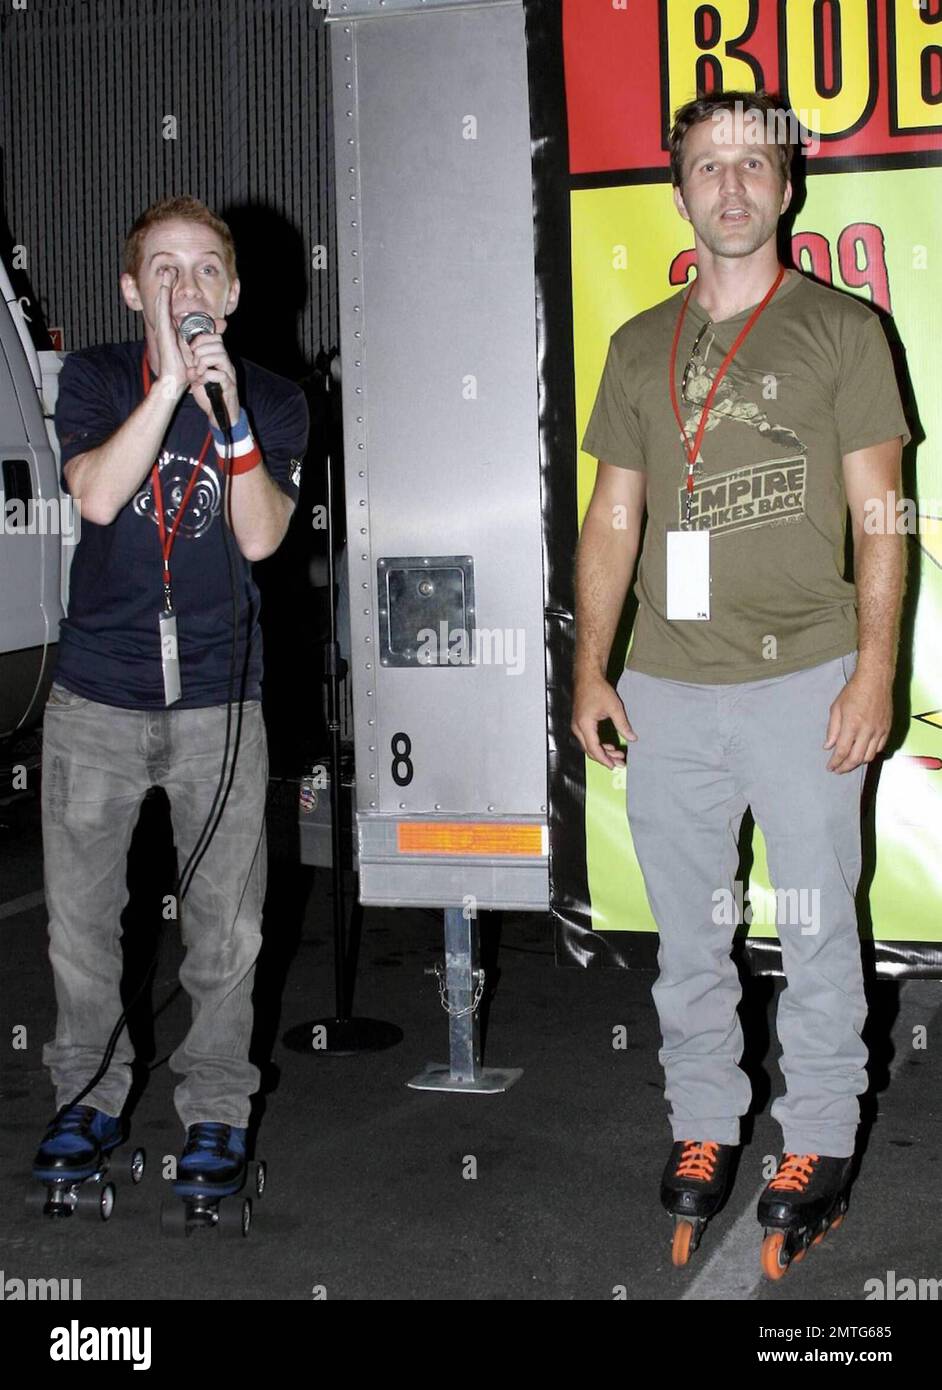 - Seth Green and Breckin Meyer attend the Robot Chicken Skate Party. The event is part of a nine-city tour celebrating the release of "Robot Chicken: Star Wars Episode II" DVD. Los Angeles, CA. 8/1/09.  . Stock Photo